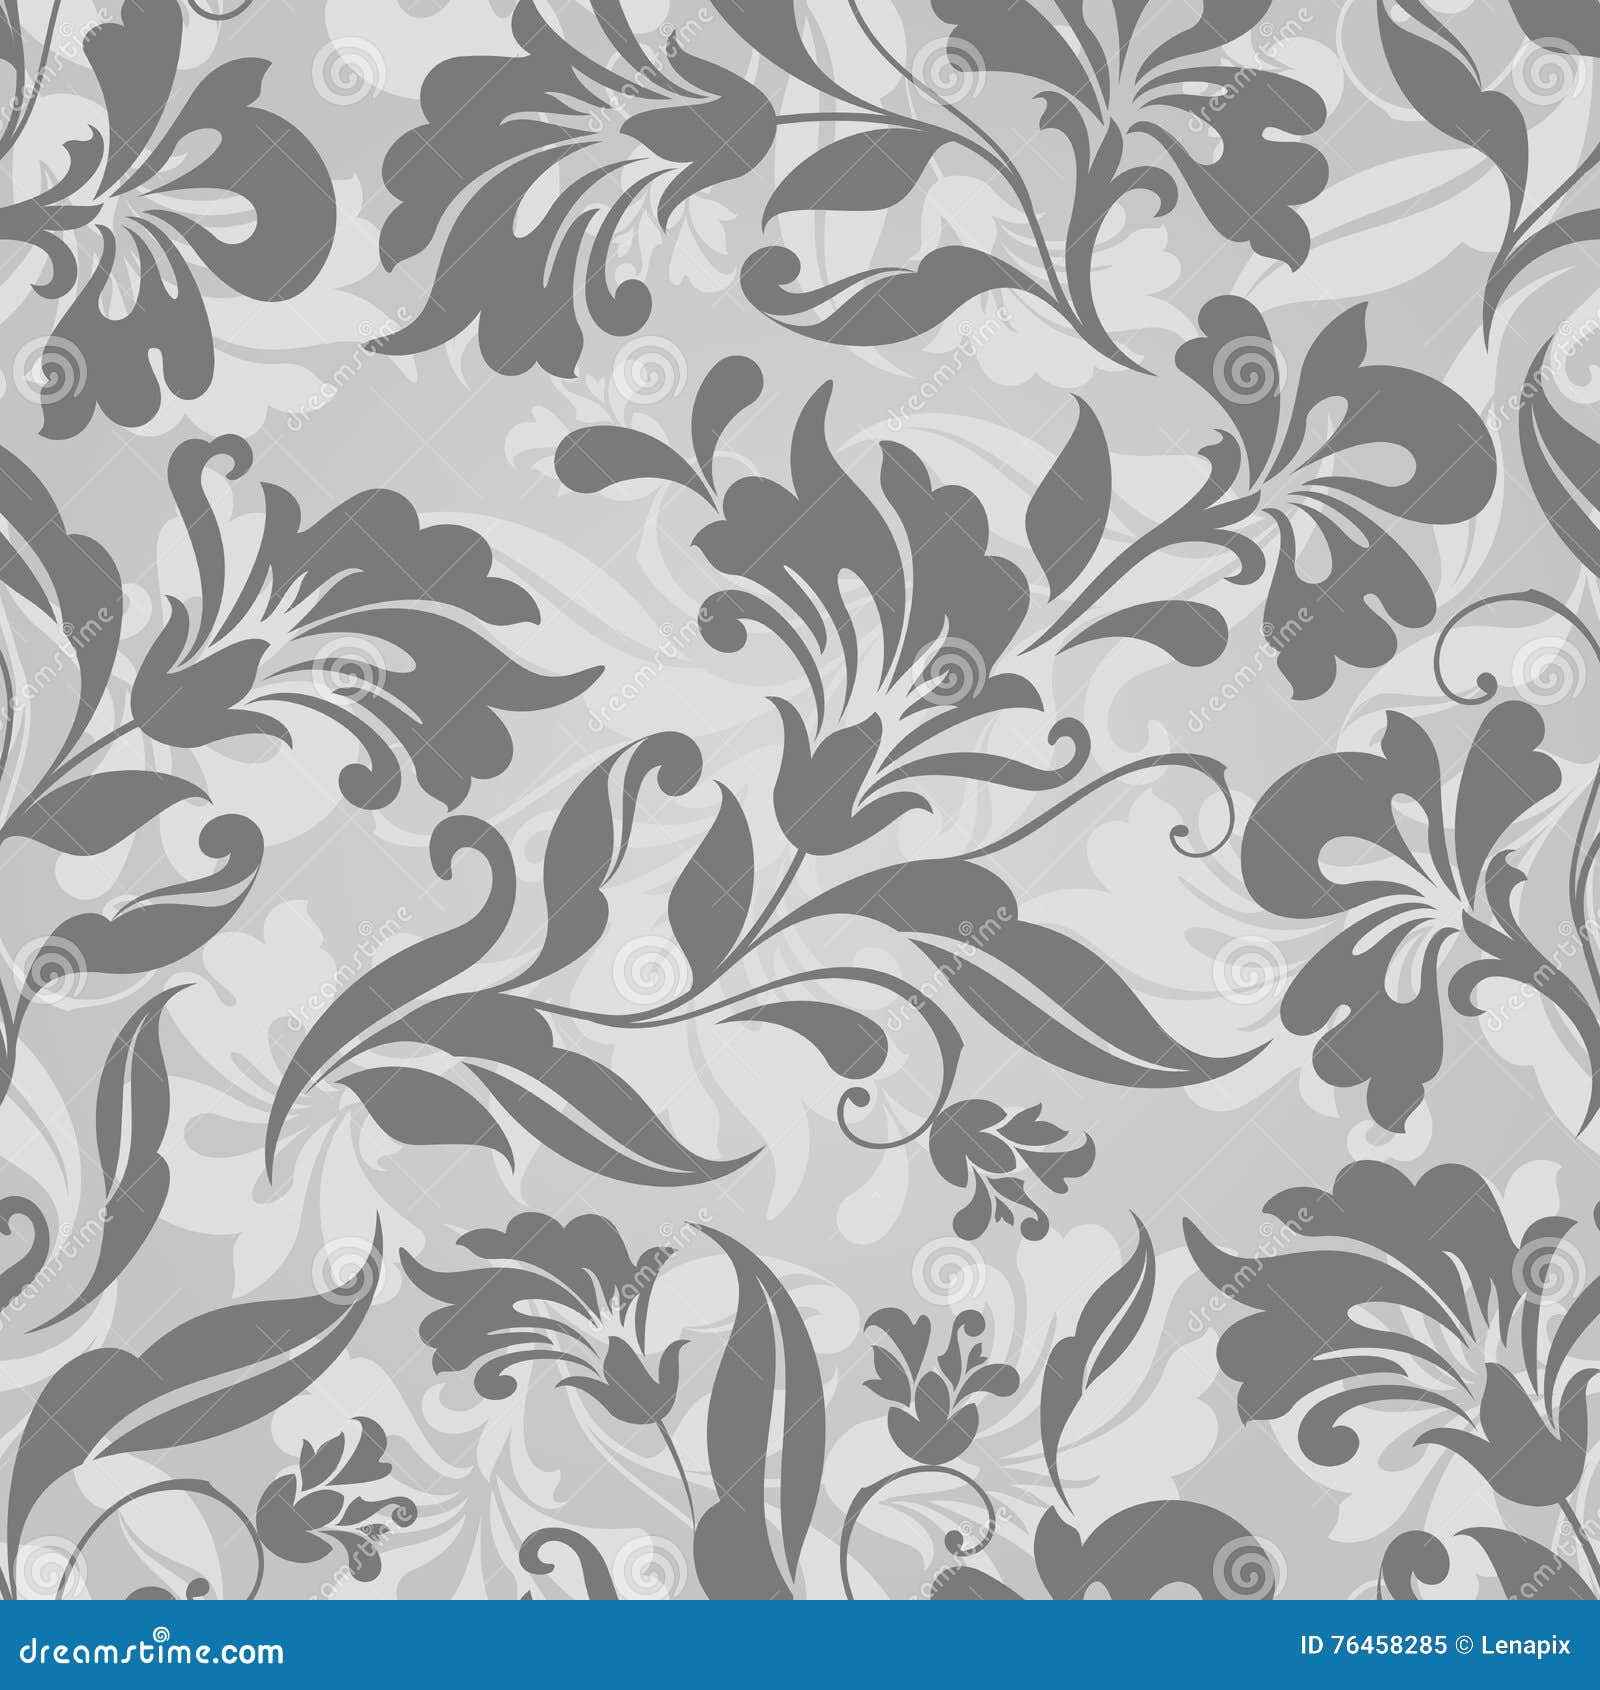 Blue Slate Floral Wrapping Paper - 20 Sheets